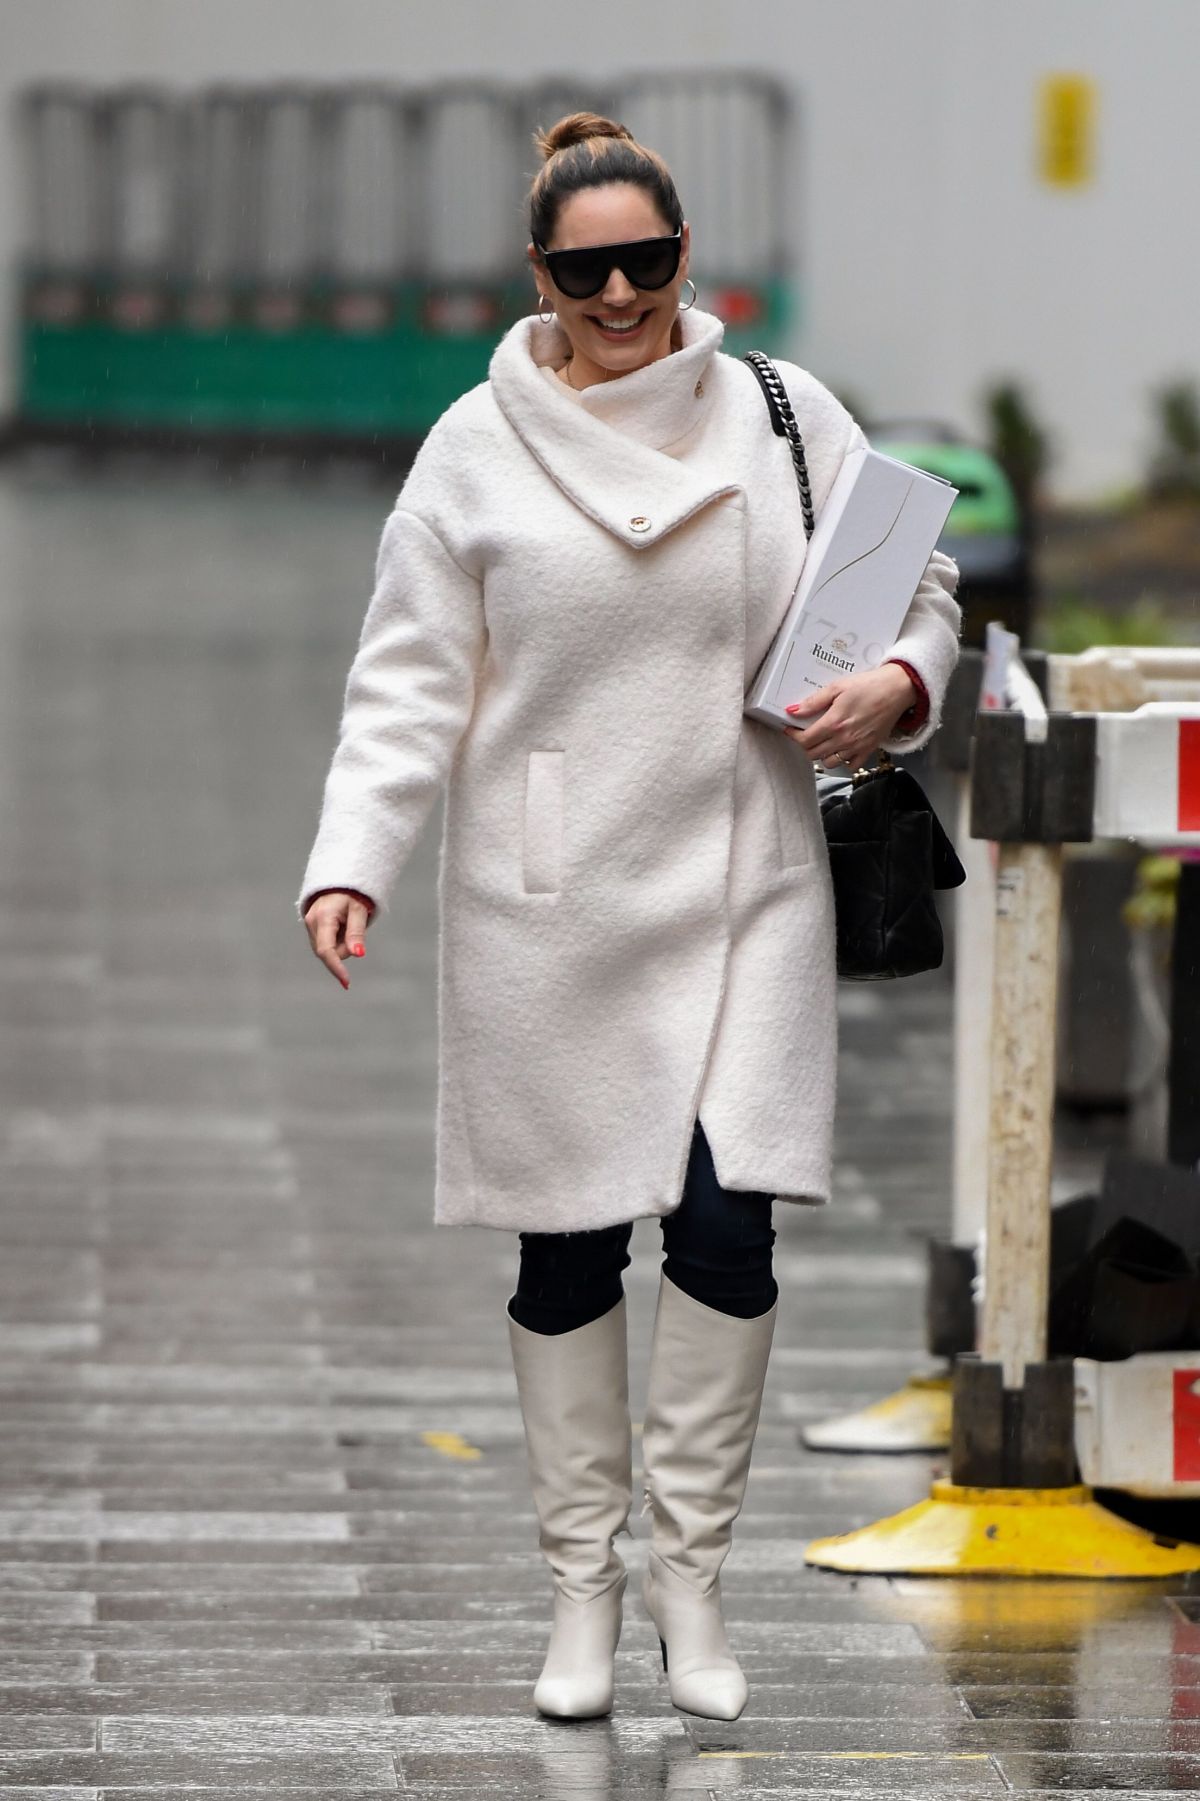 179310294_kelly-brook-in-a-white-coat-and-boots-at-global-radio-in-london-12-23-2020-7.jpg